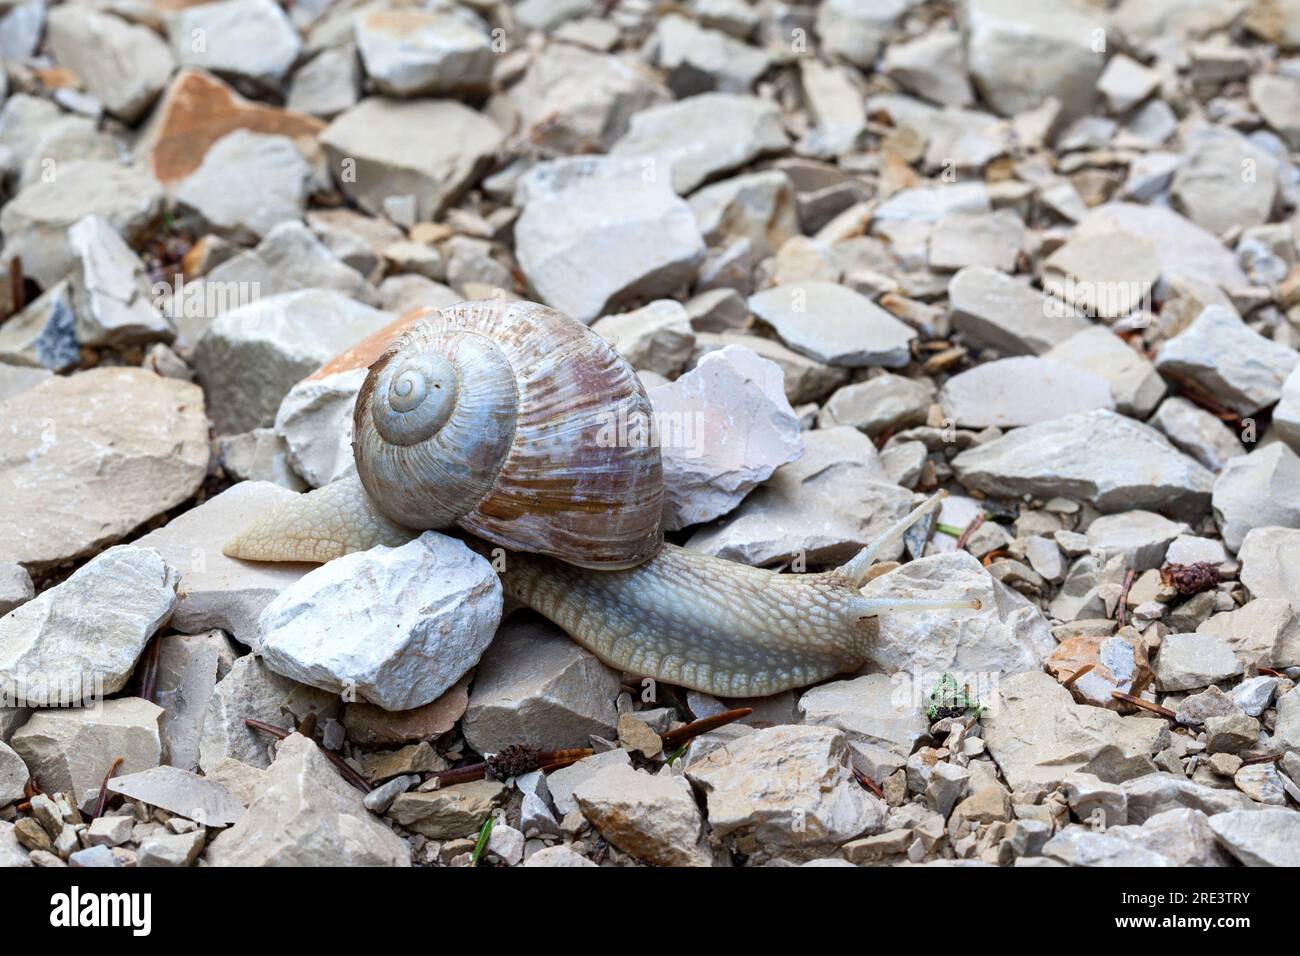 At a snail's pace over rocky paths. A Roman snail crawls along a gravel path. Stock Photo